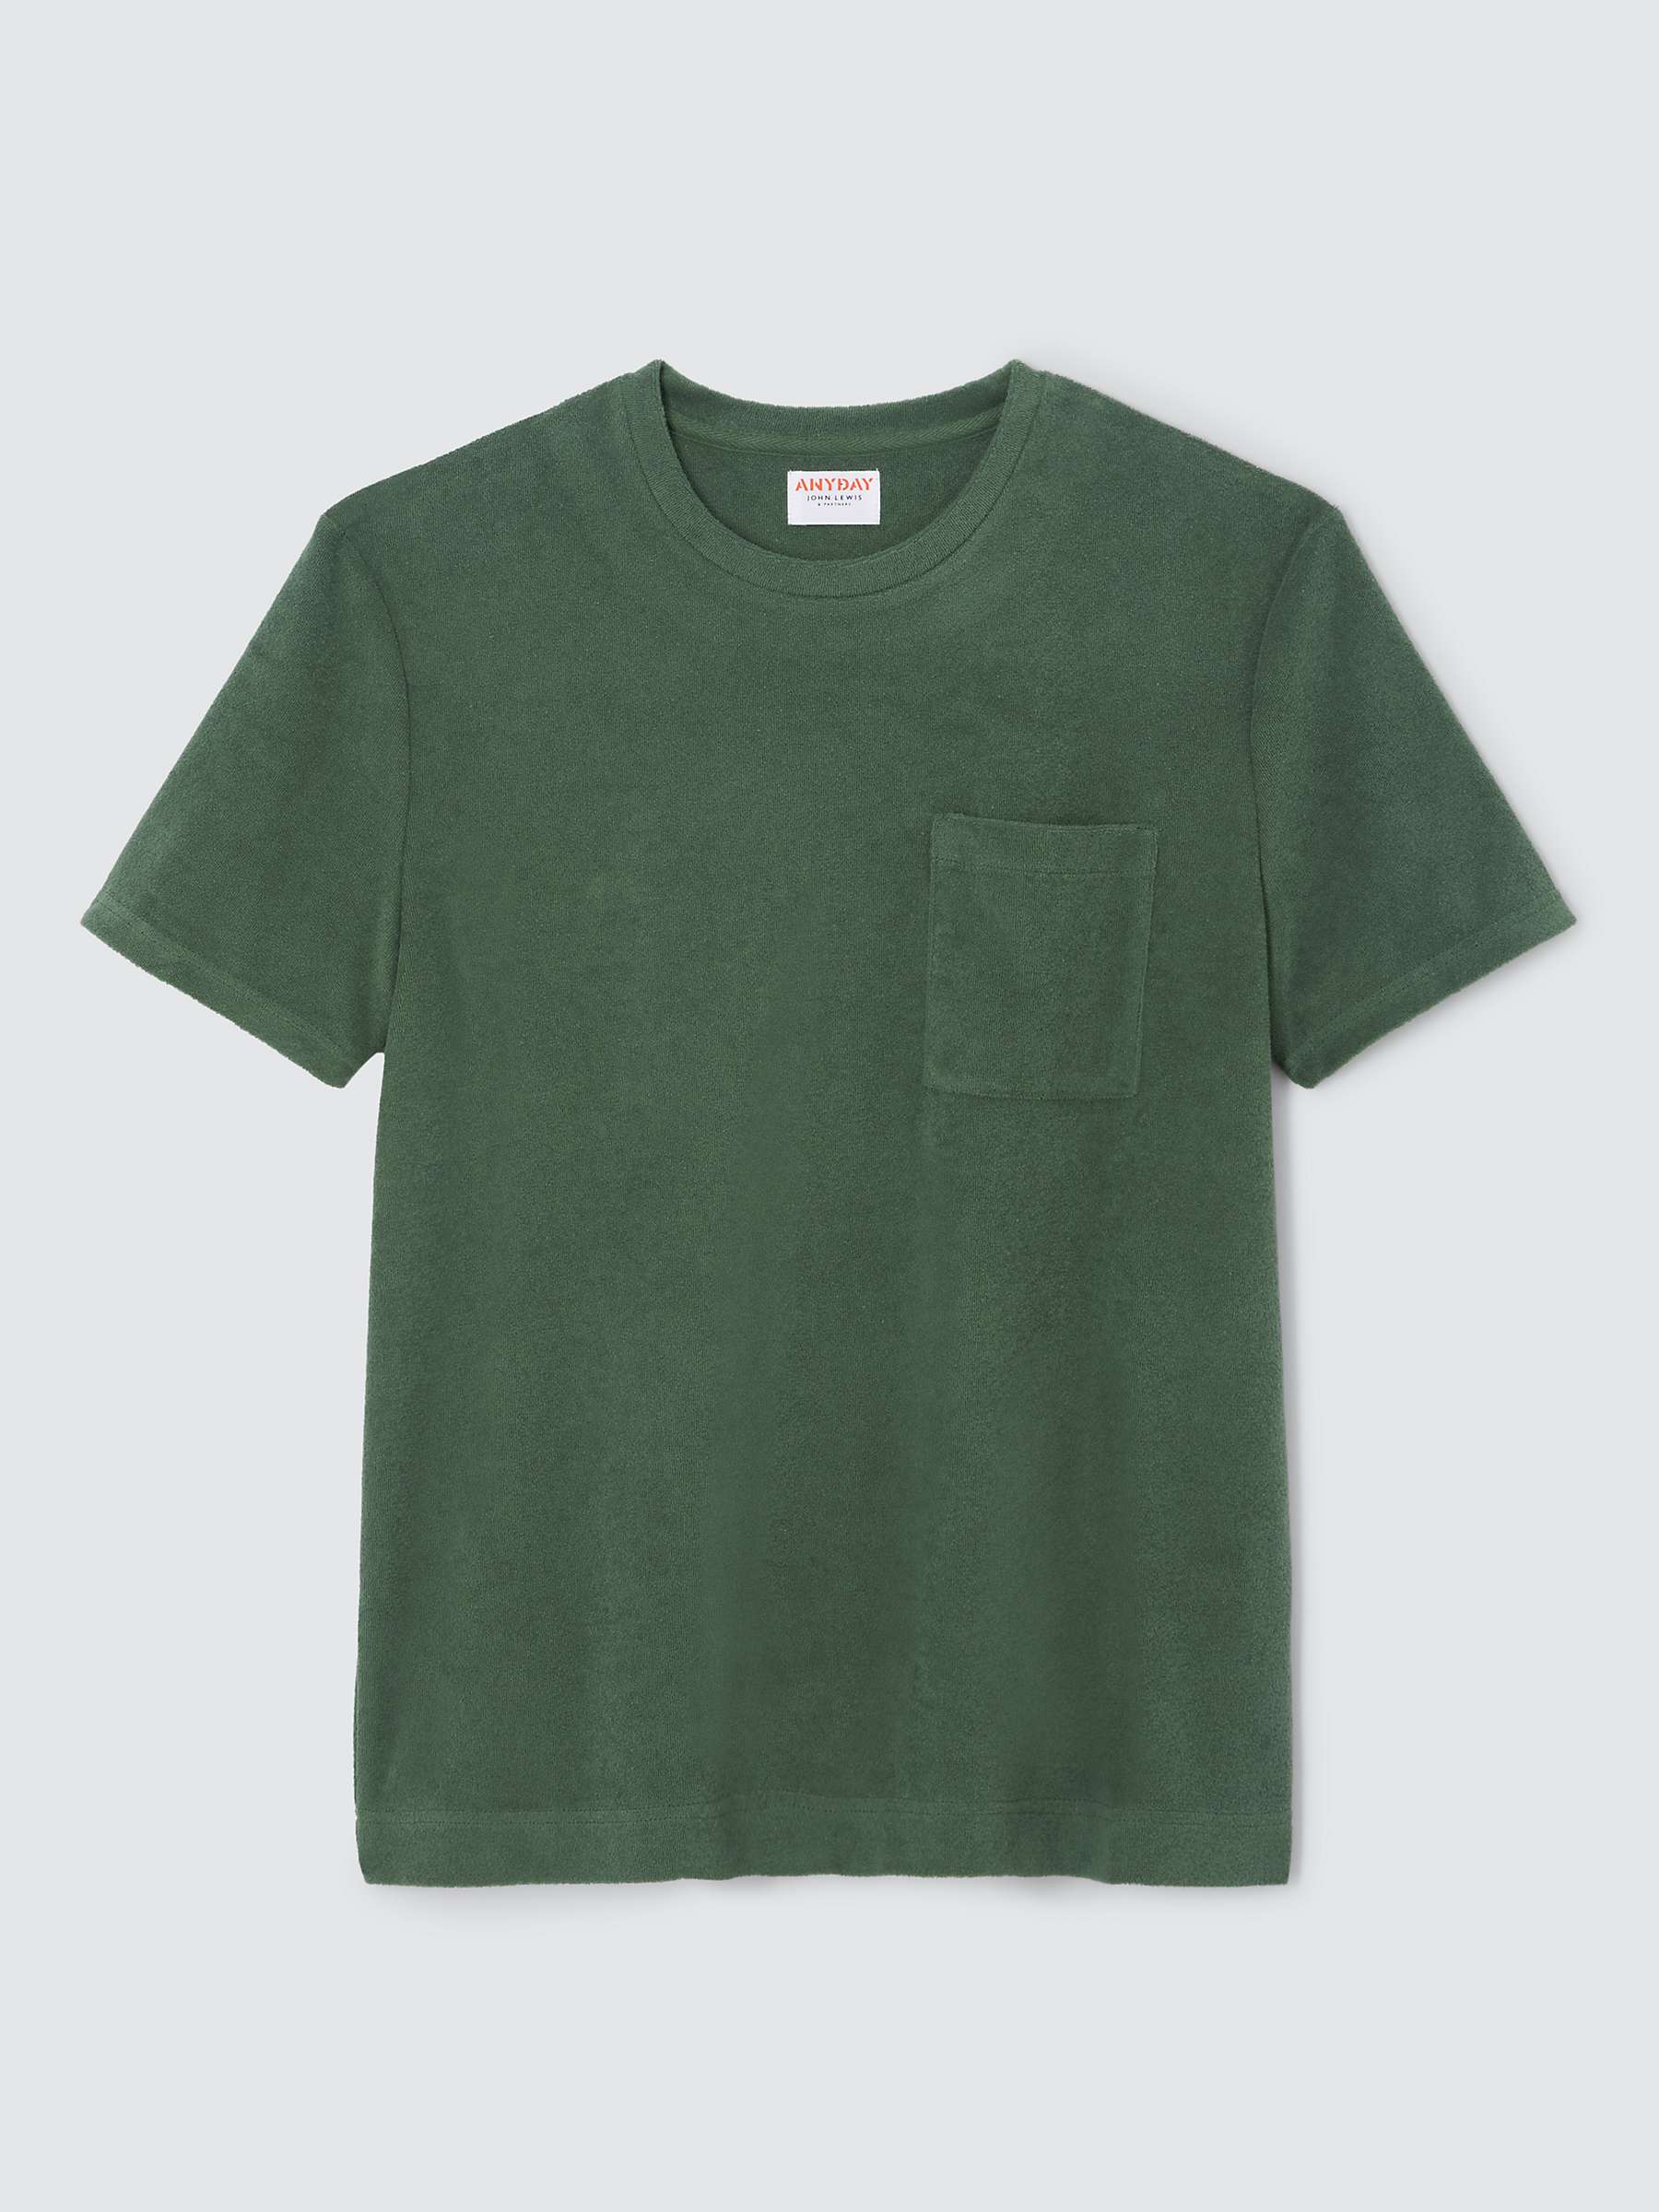 Buy John Lewis ANYDAY Towelling T-Shirt Online at johnlewis.com